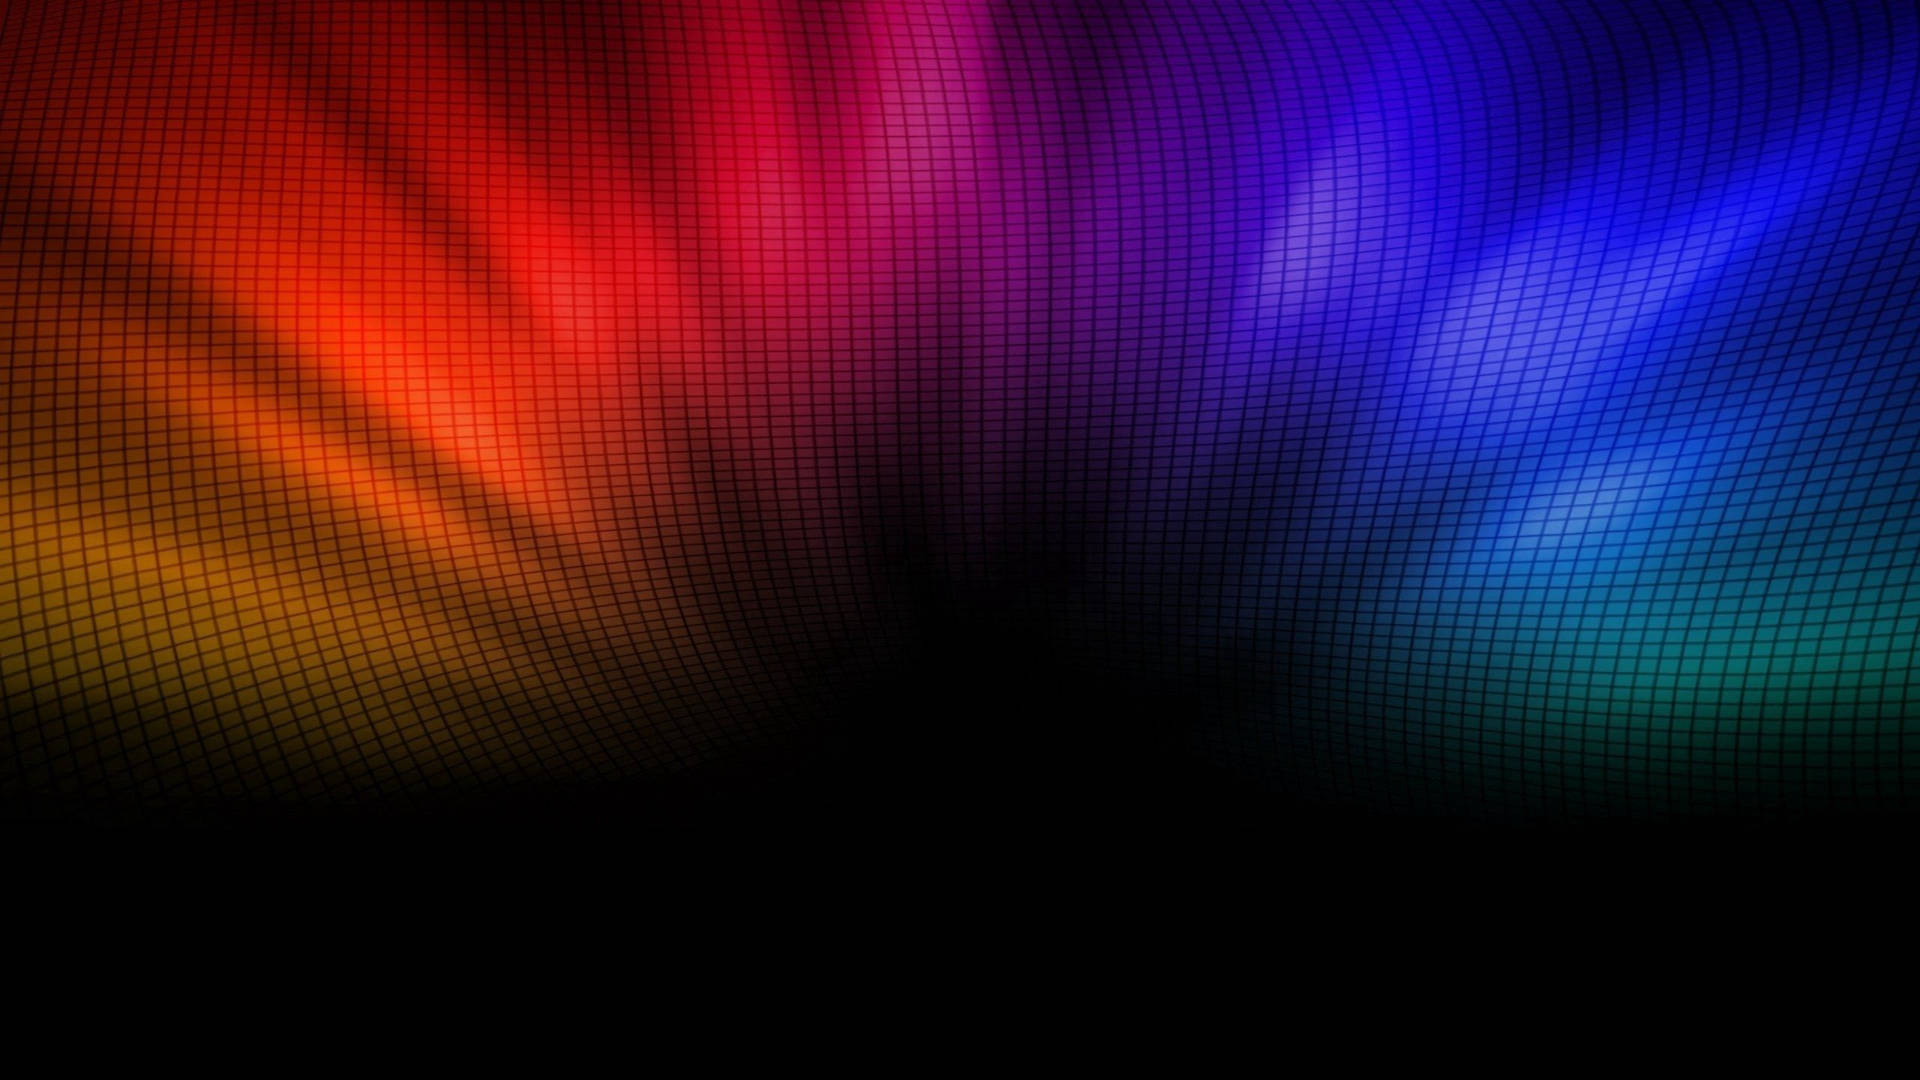 All Color Wallpapers